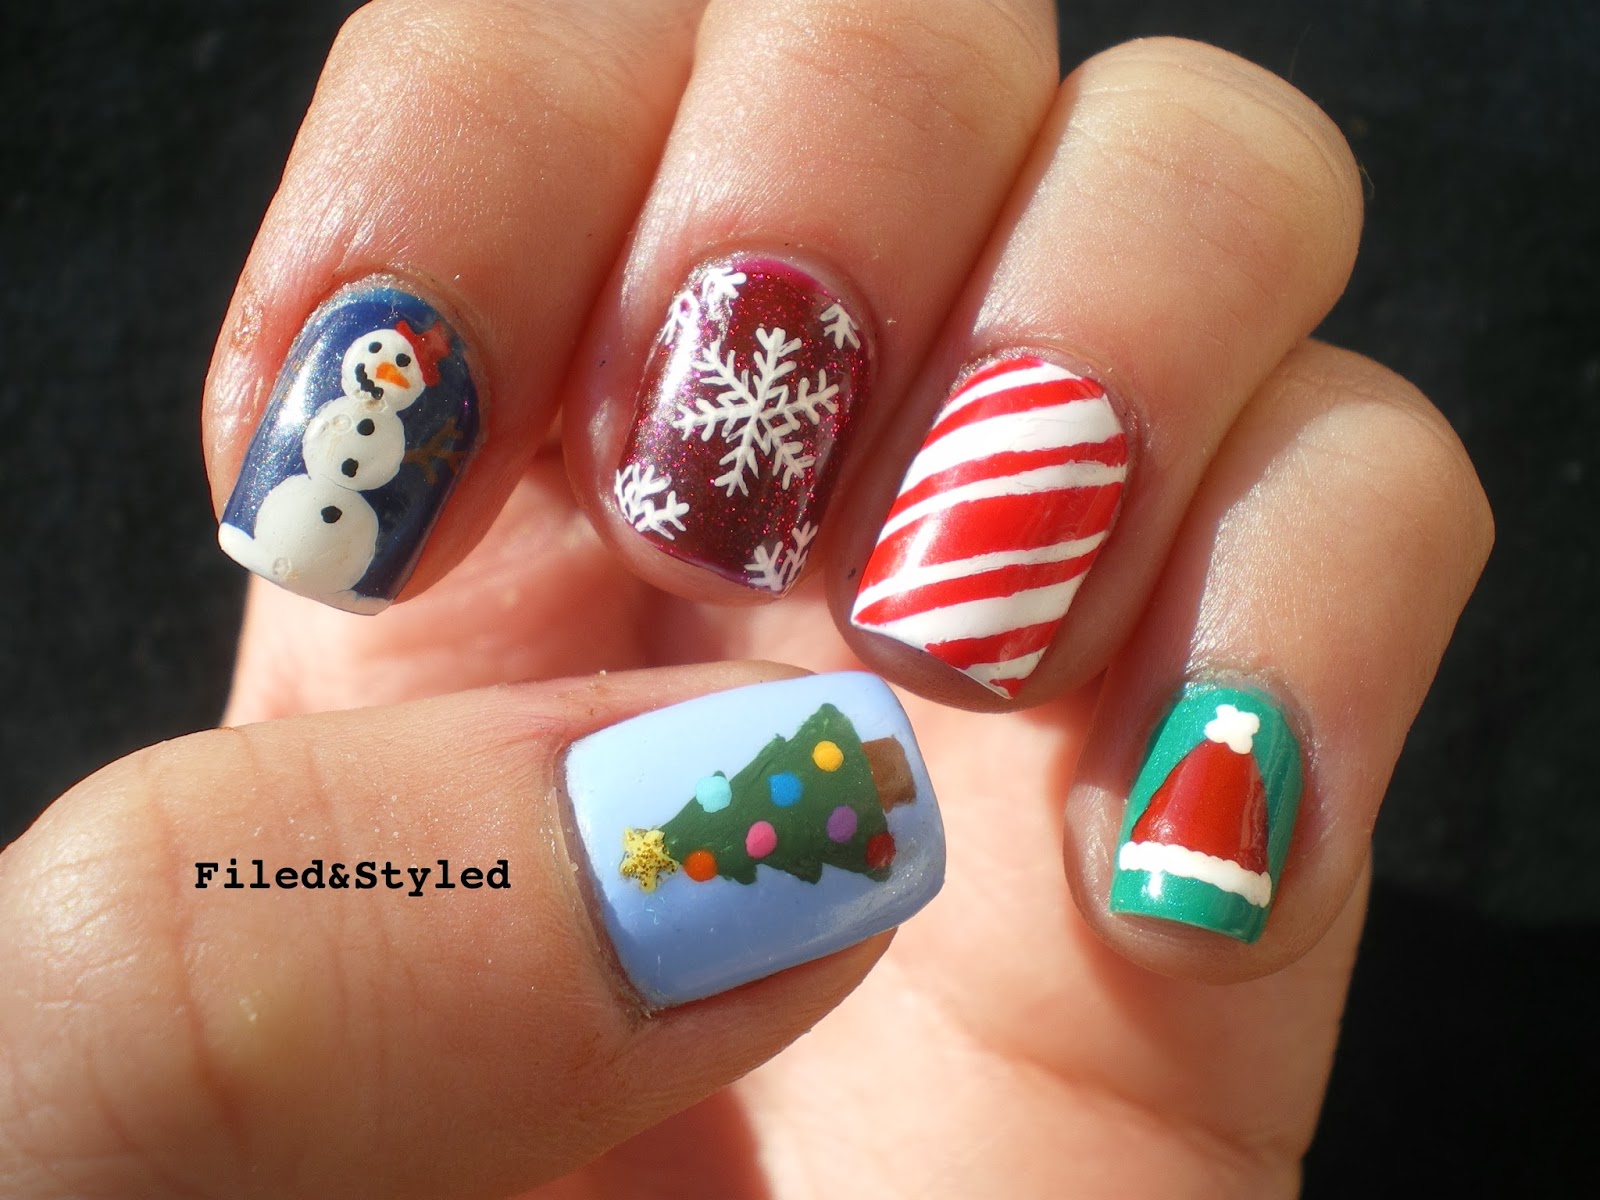 Christmas Nails | Filed & Styled Filed & Styled: Christmas Nails